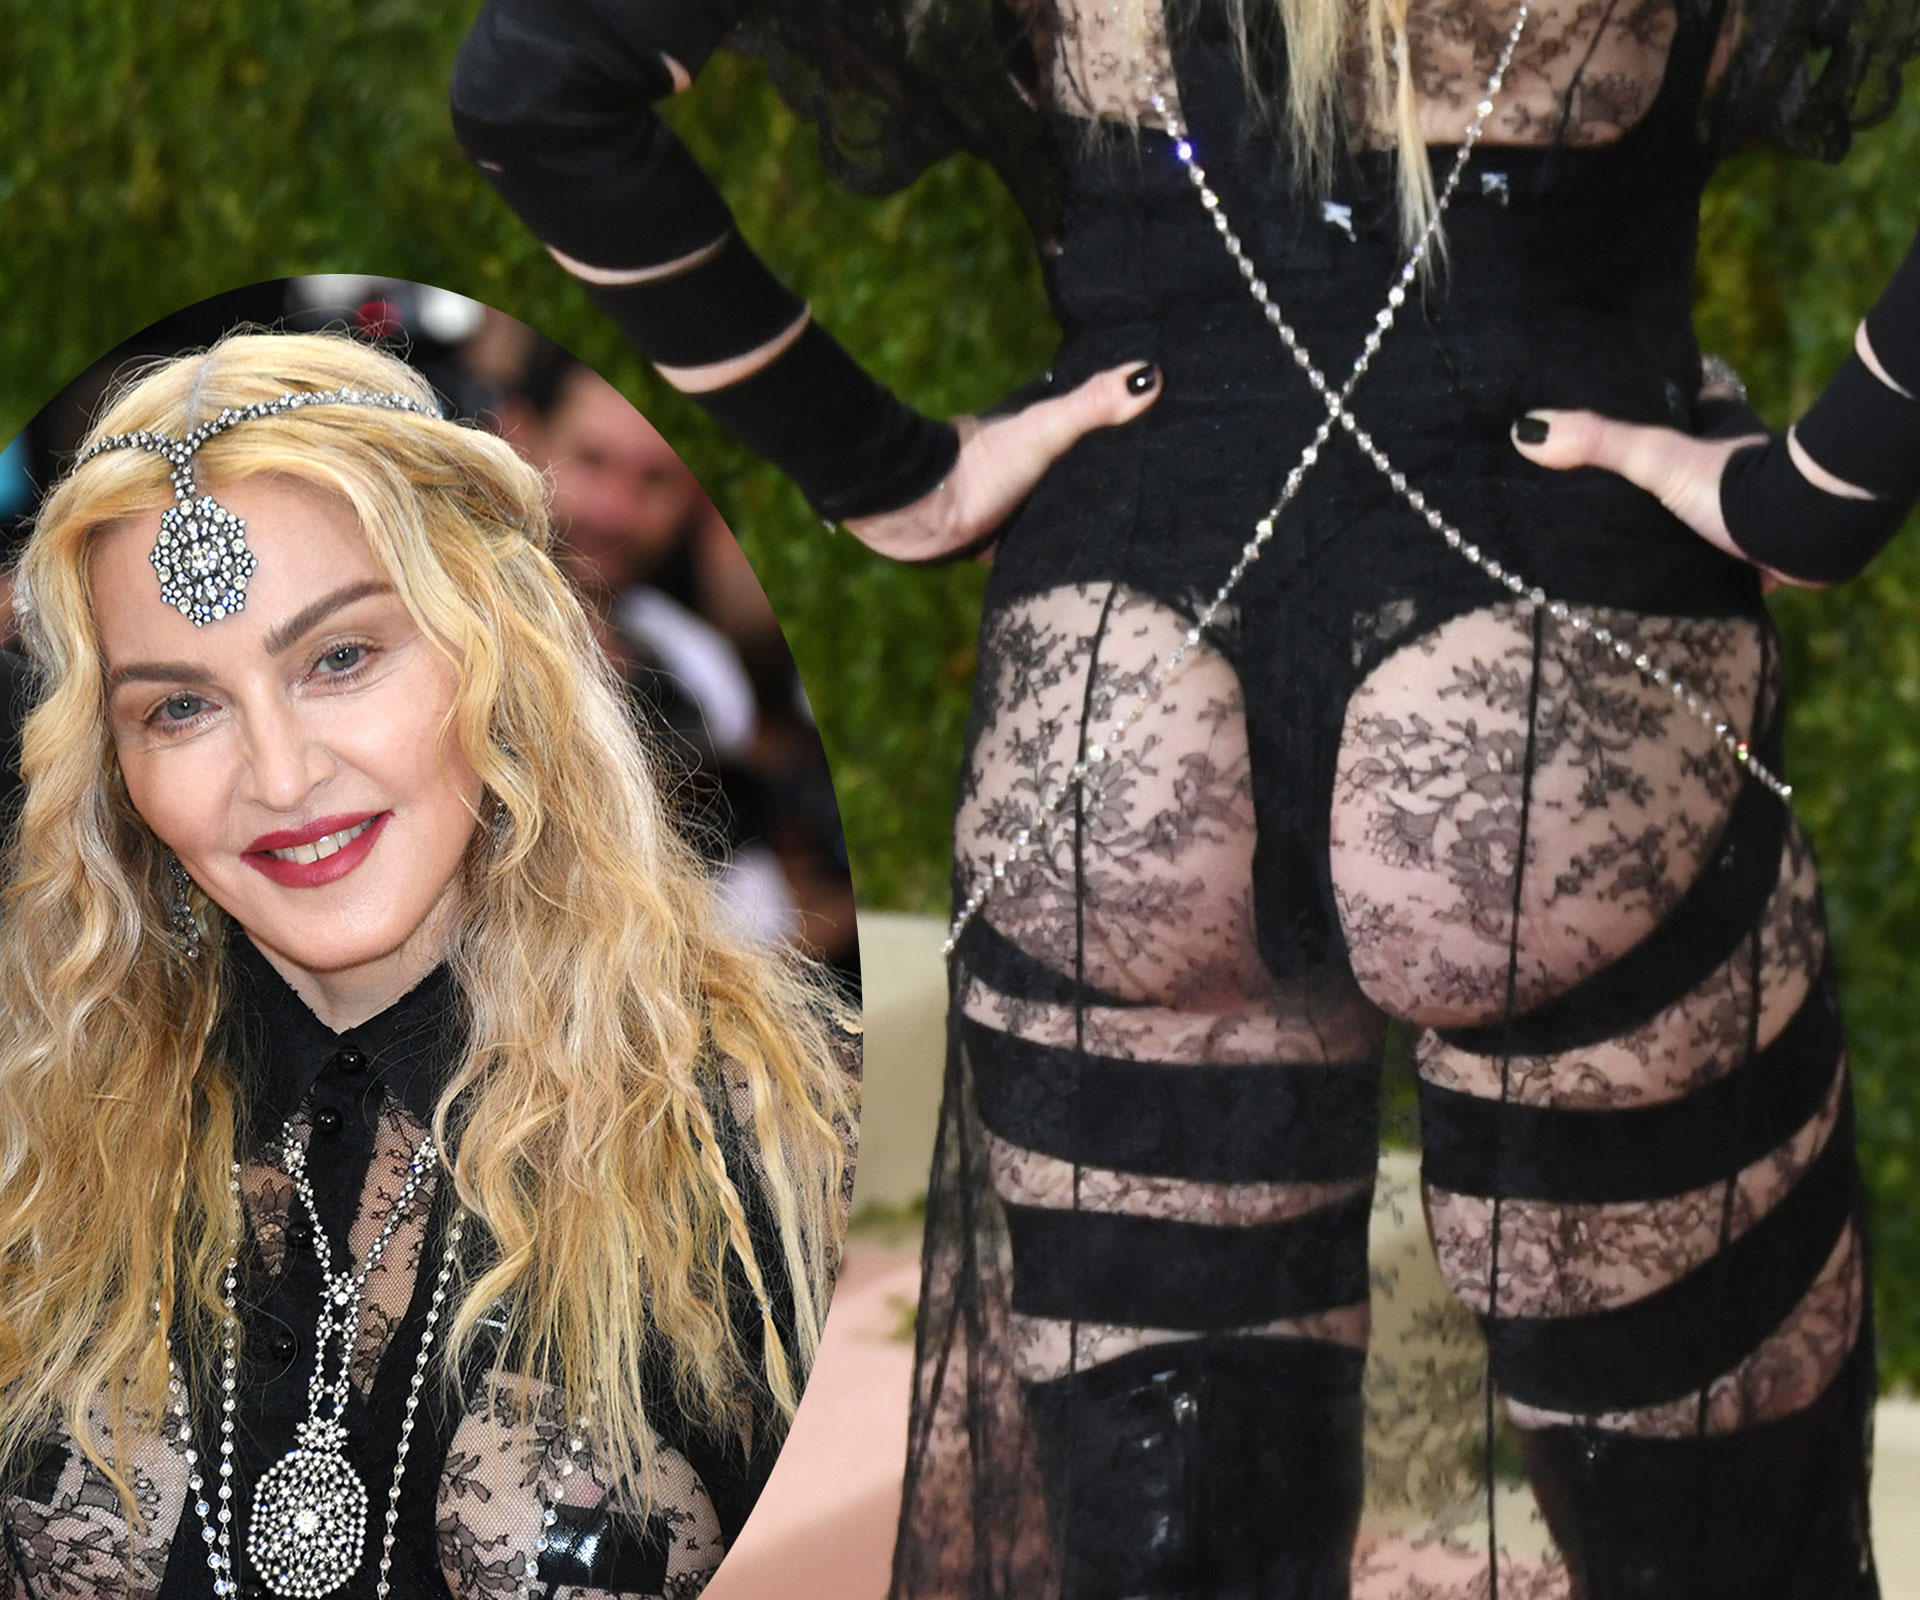 how old is too old to dress like madonna?